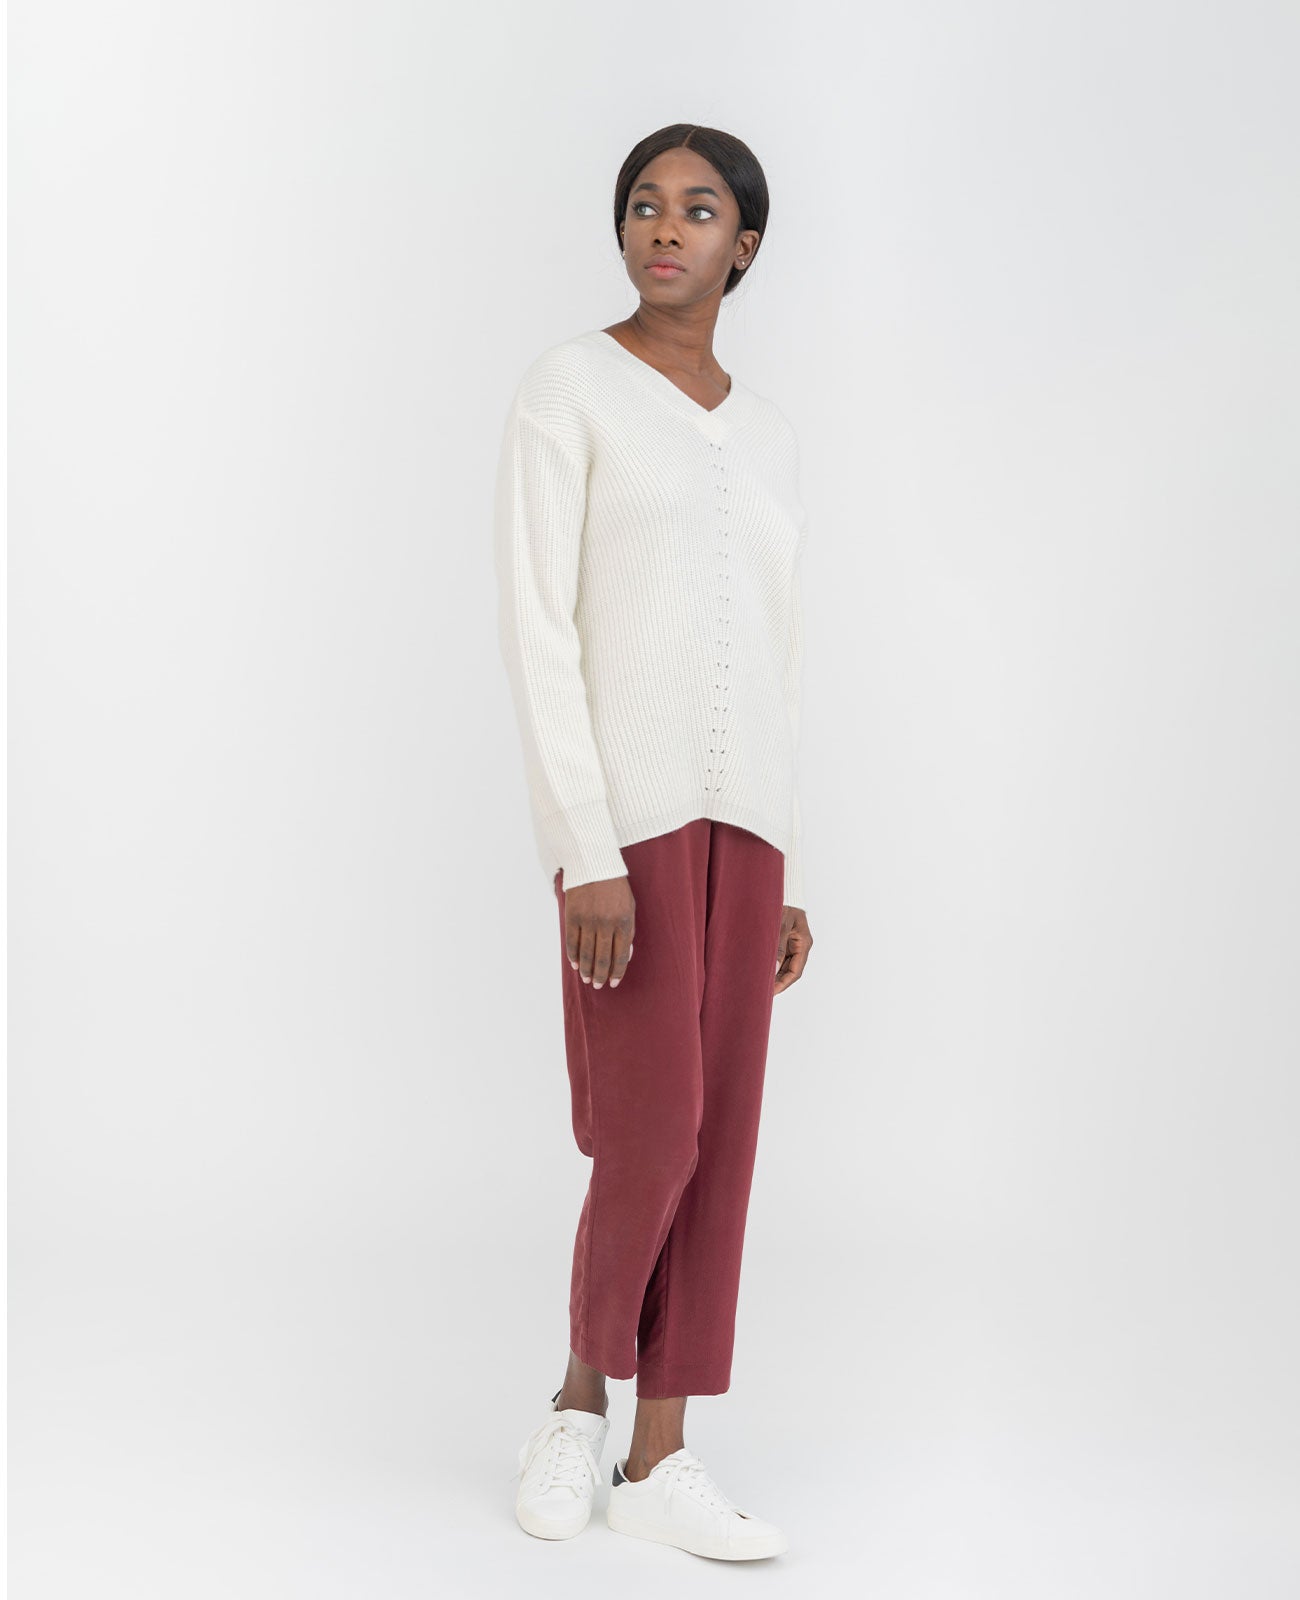 Moving Rib V-Neck Sweater in Ivory | GRANA #color_ivory